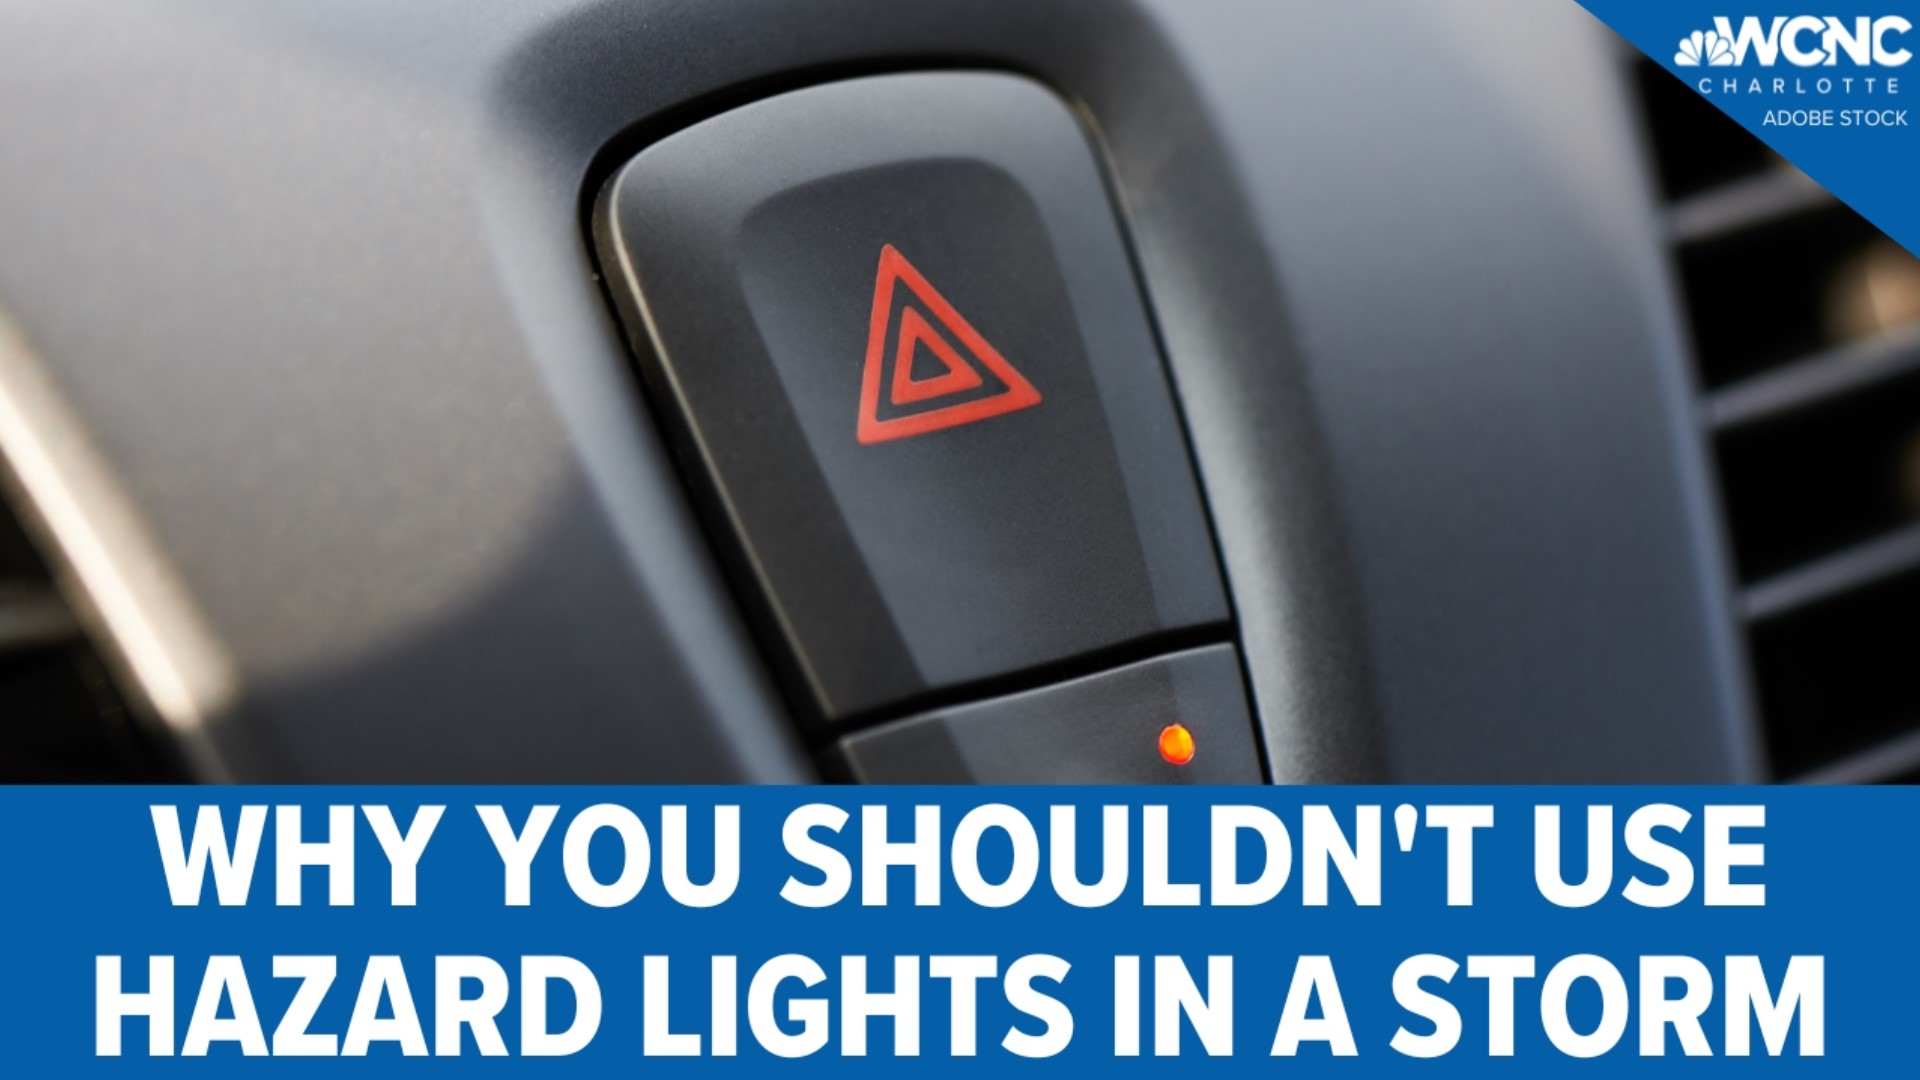 You may think using your hazards helps you be more visible in the rain, but it can actually be a distraction.  Instead, make sure your lights are on and slow down